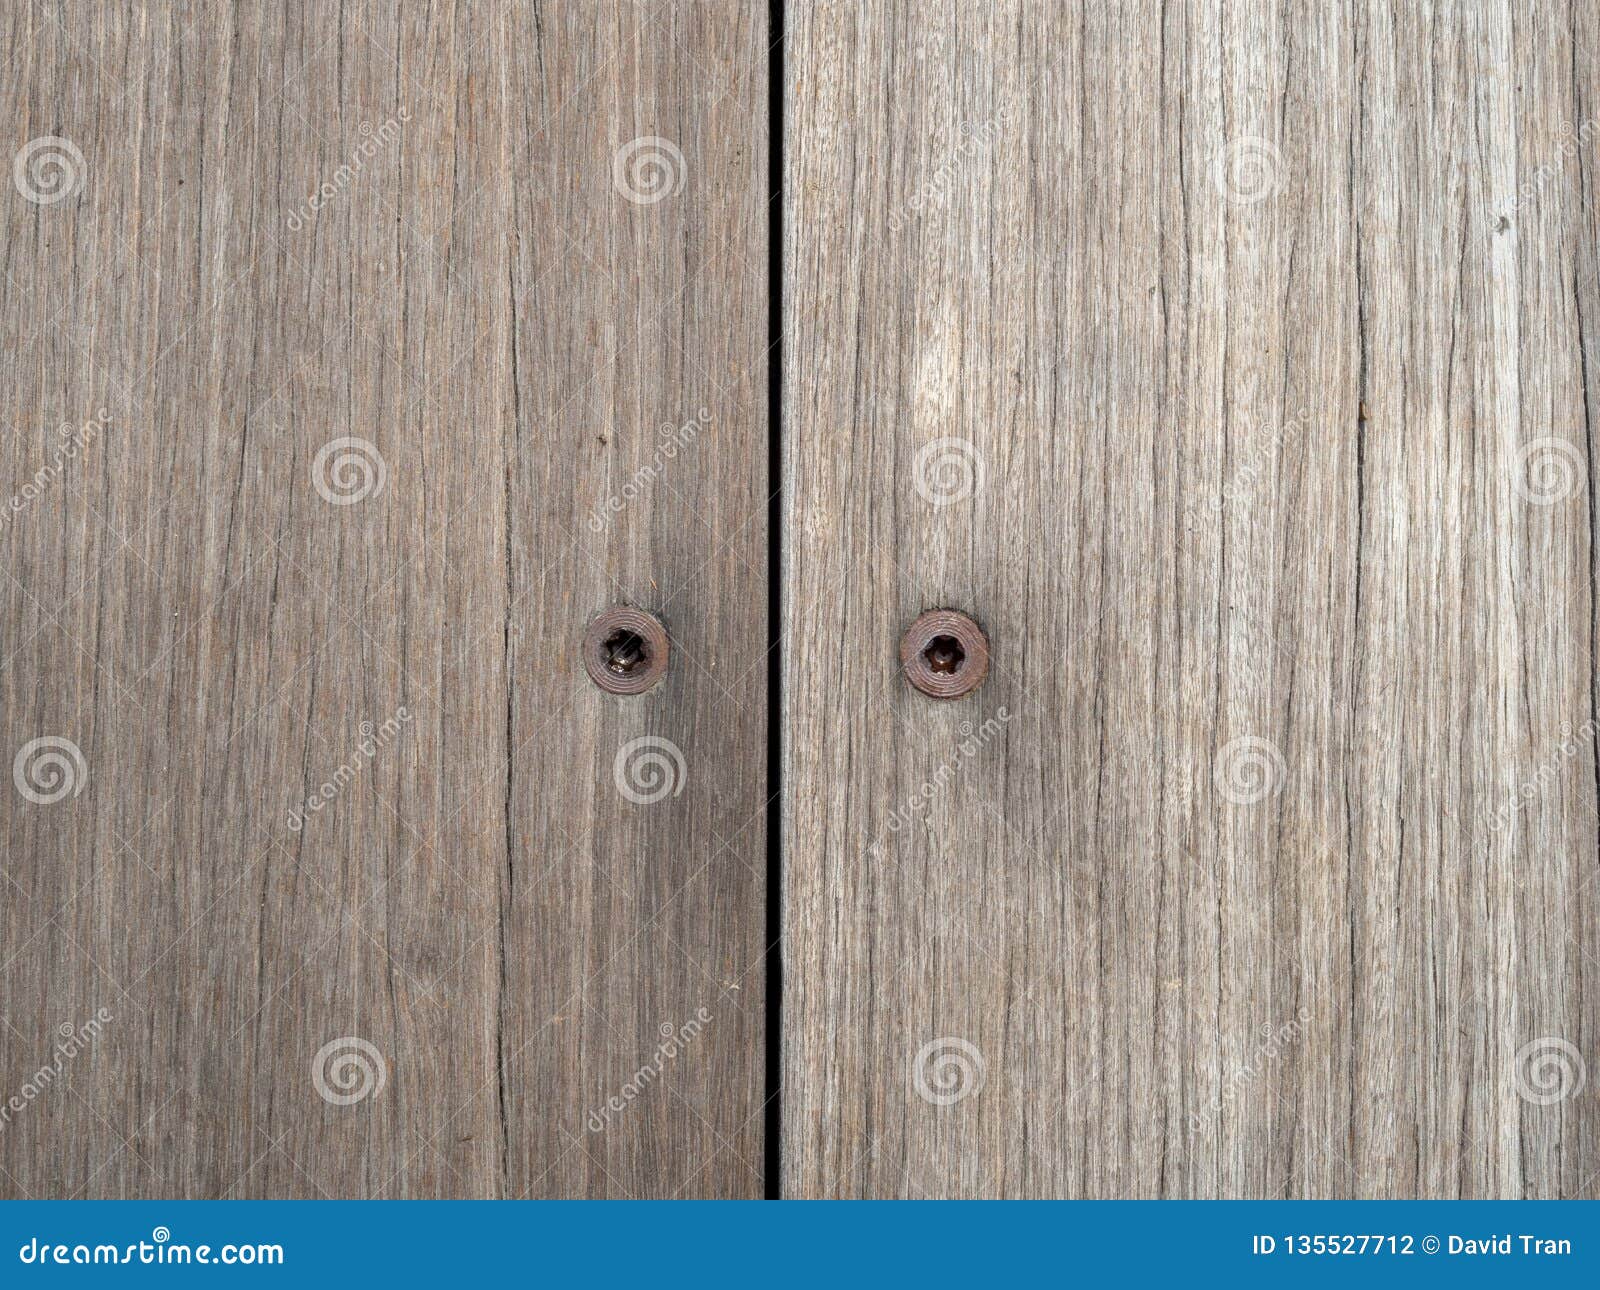 Two Rusty Hex Screws Inside Wooden Boards Stock Photo Image Of